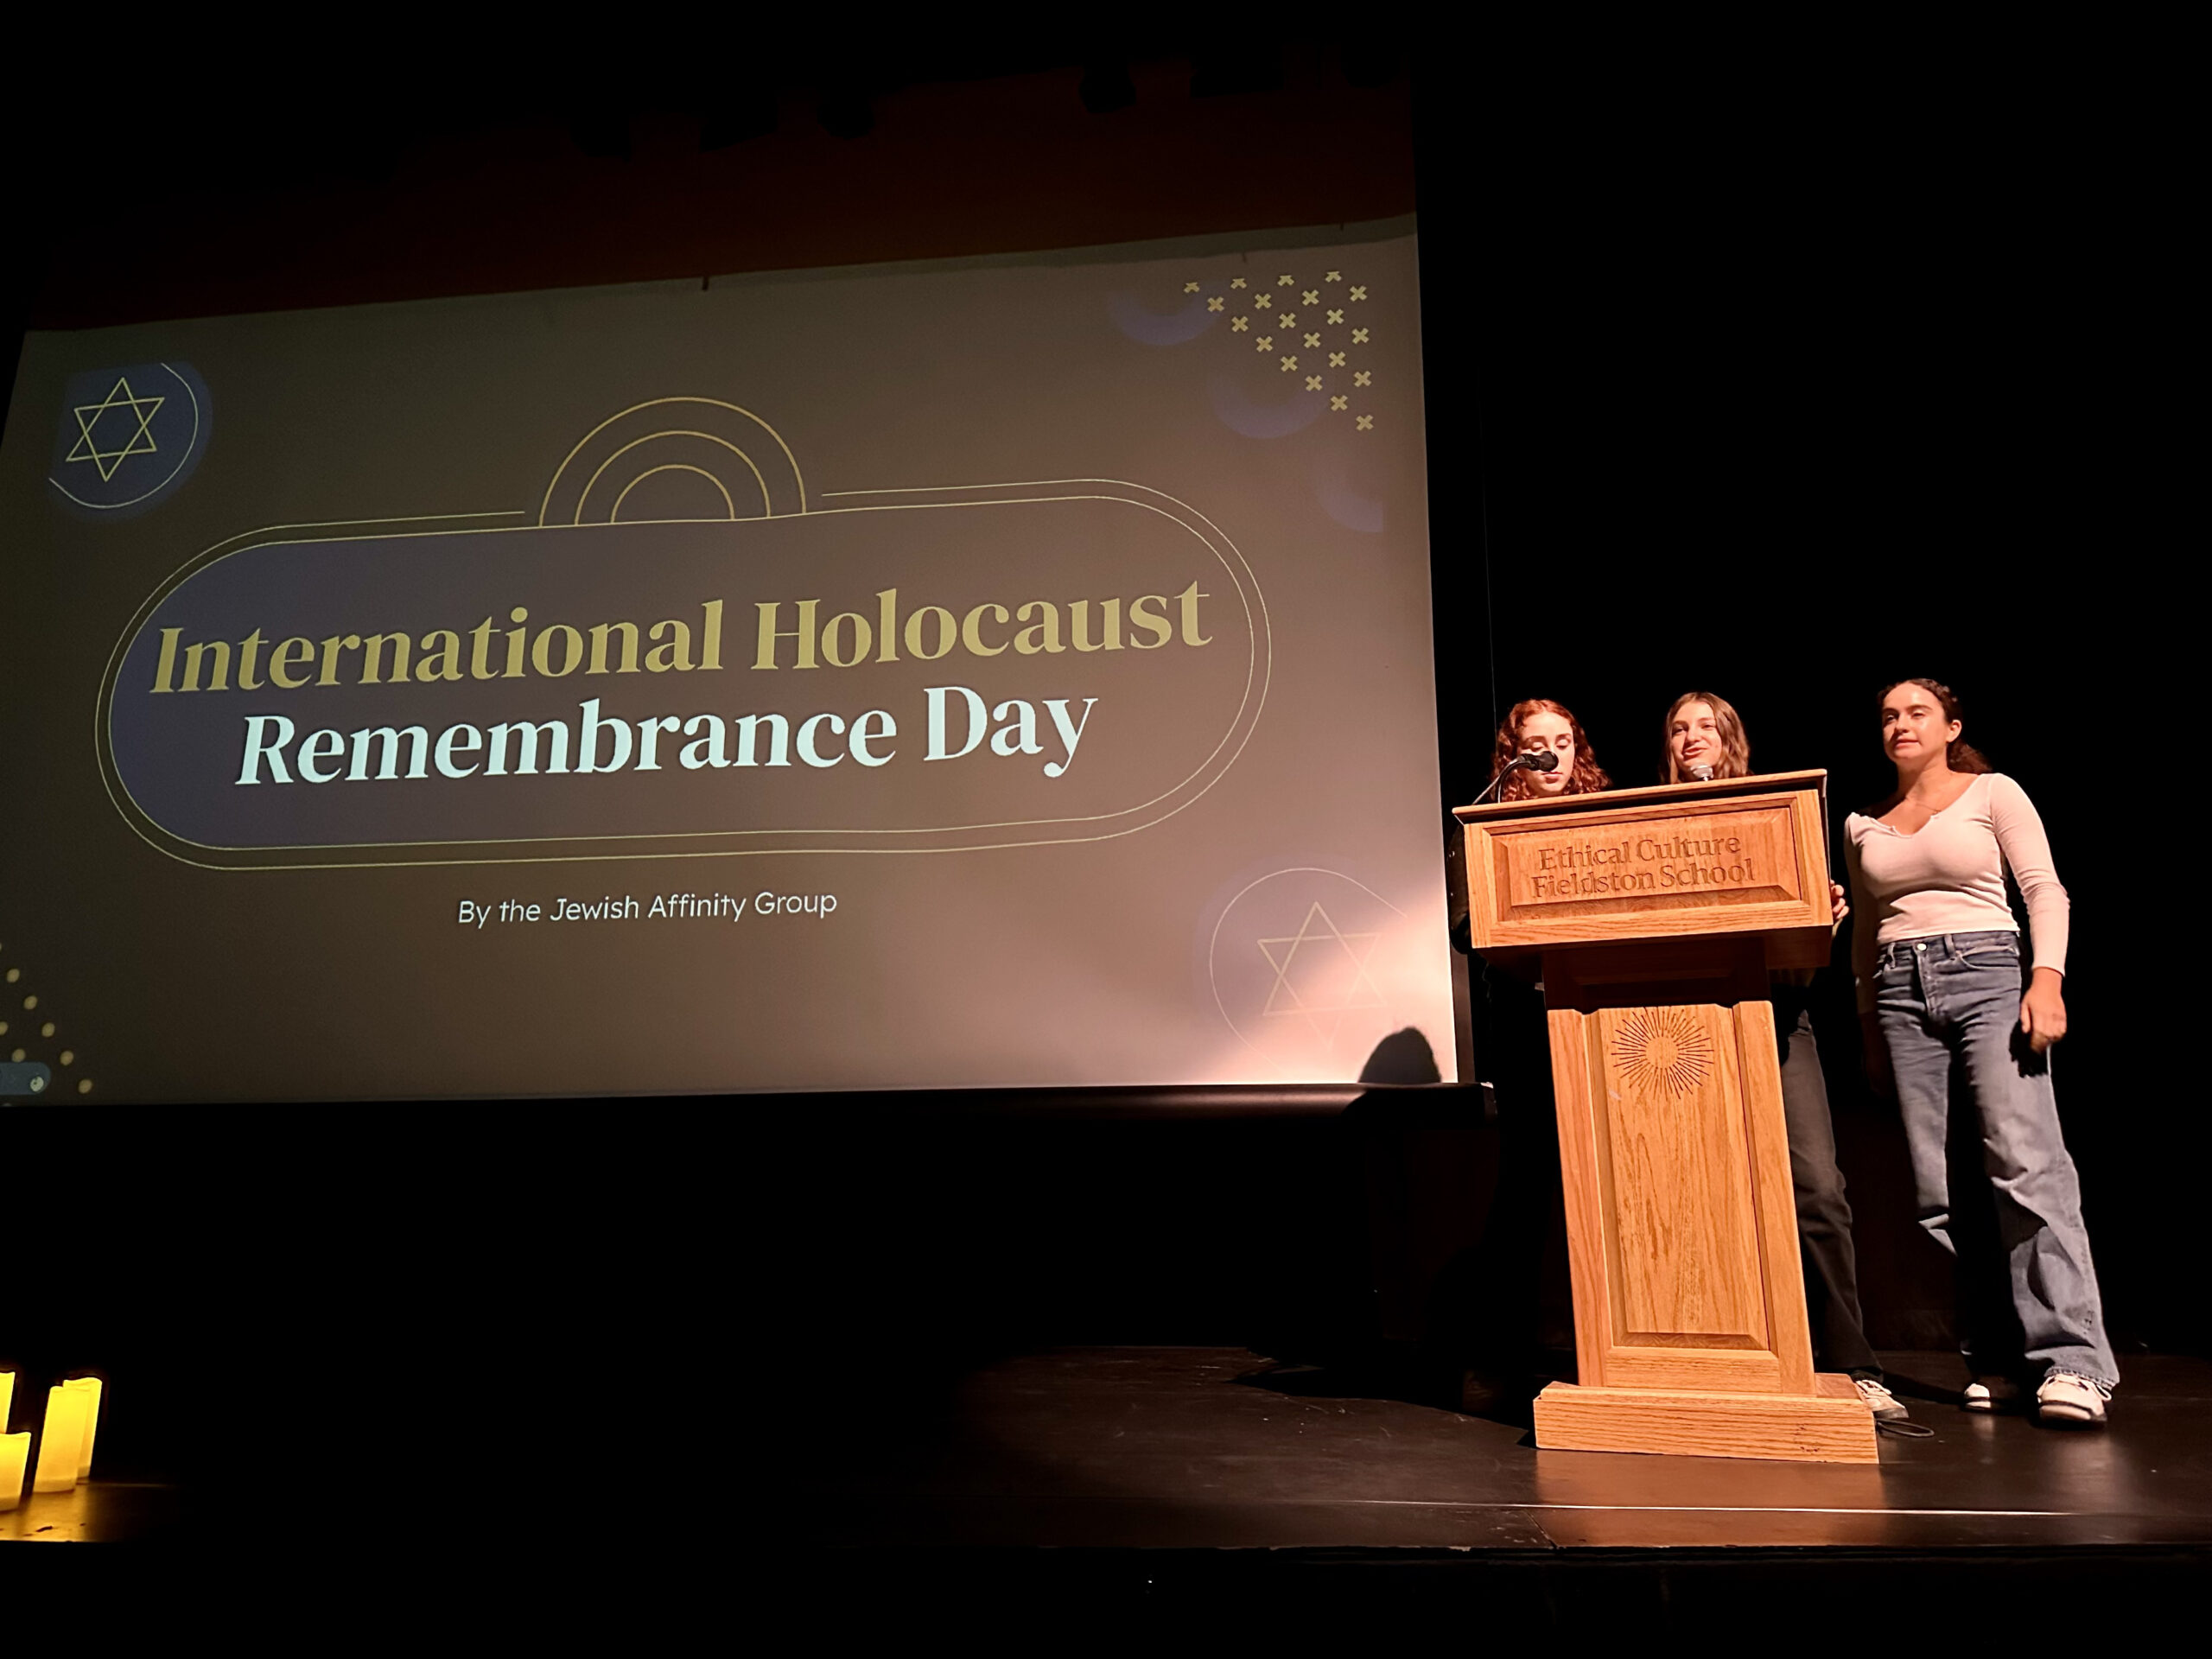 Members of the student Jewish Affinity Group give assembly presentation on International Holocaust Remembrance Day.